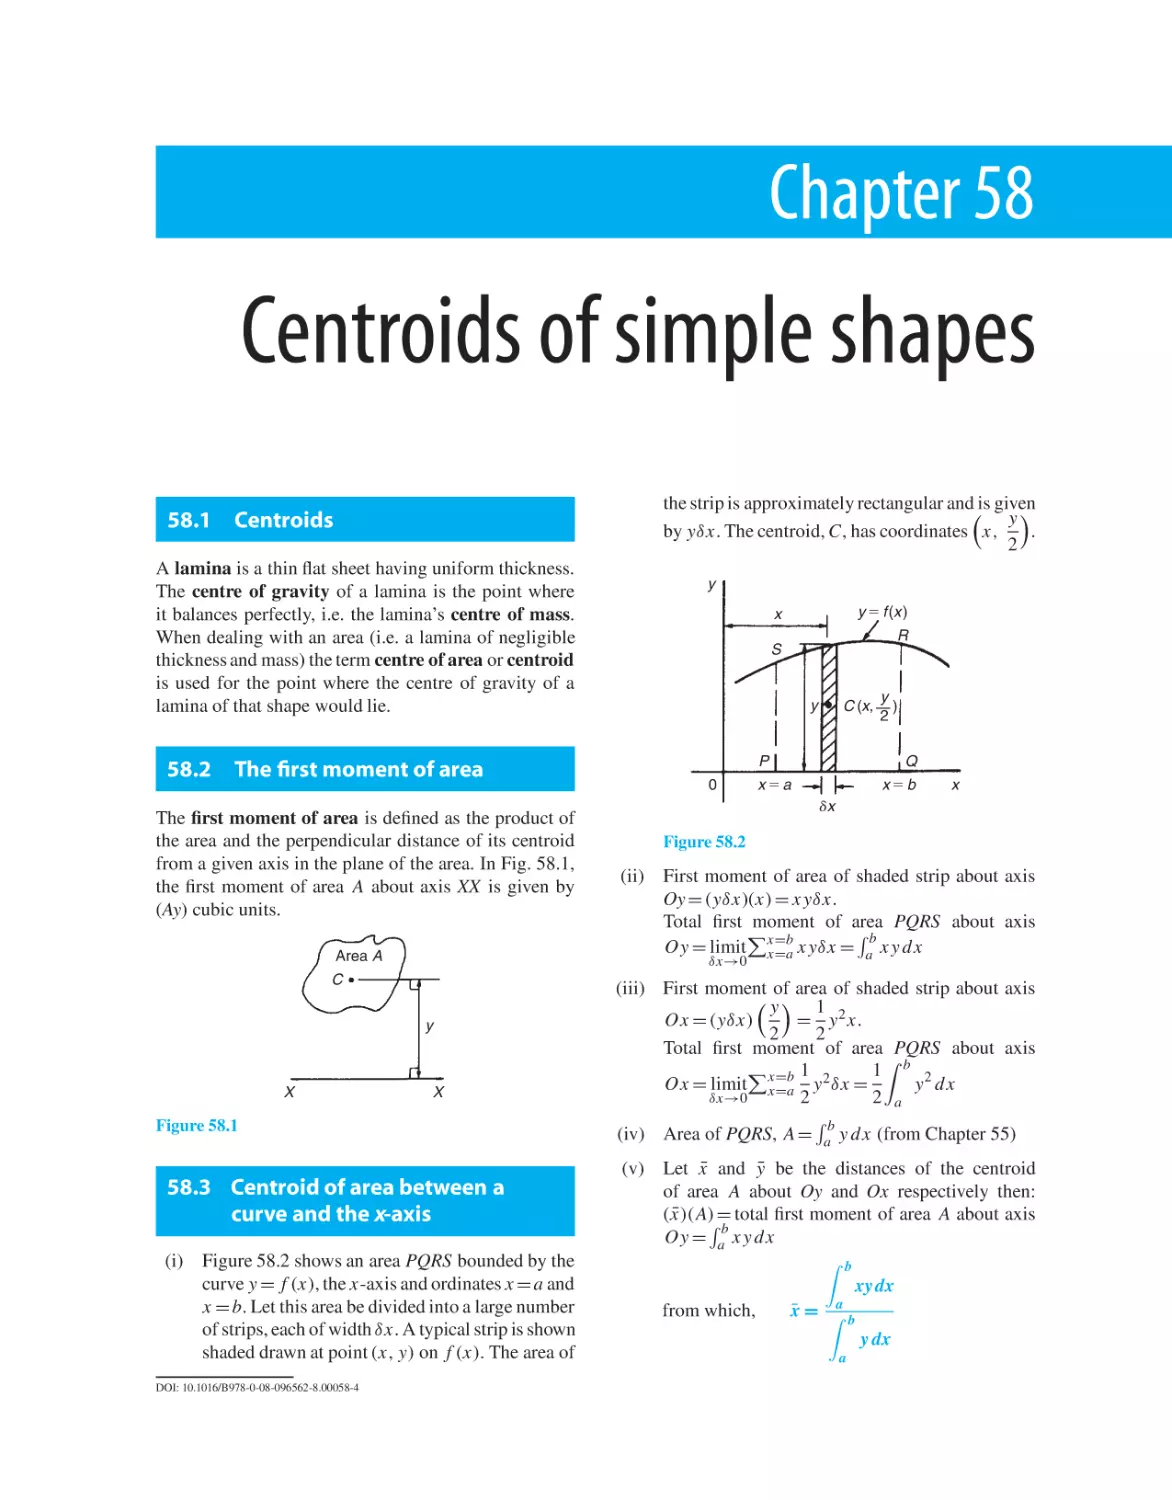 Chapter 58. Centroids of simple shapes
58.1 Centroids
58.2 The first moment of area
58.3 Centroid of area between a curve and the x-axis